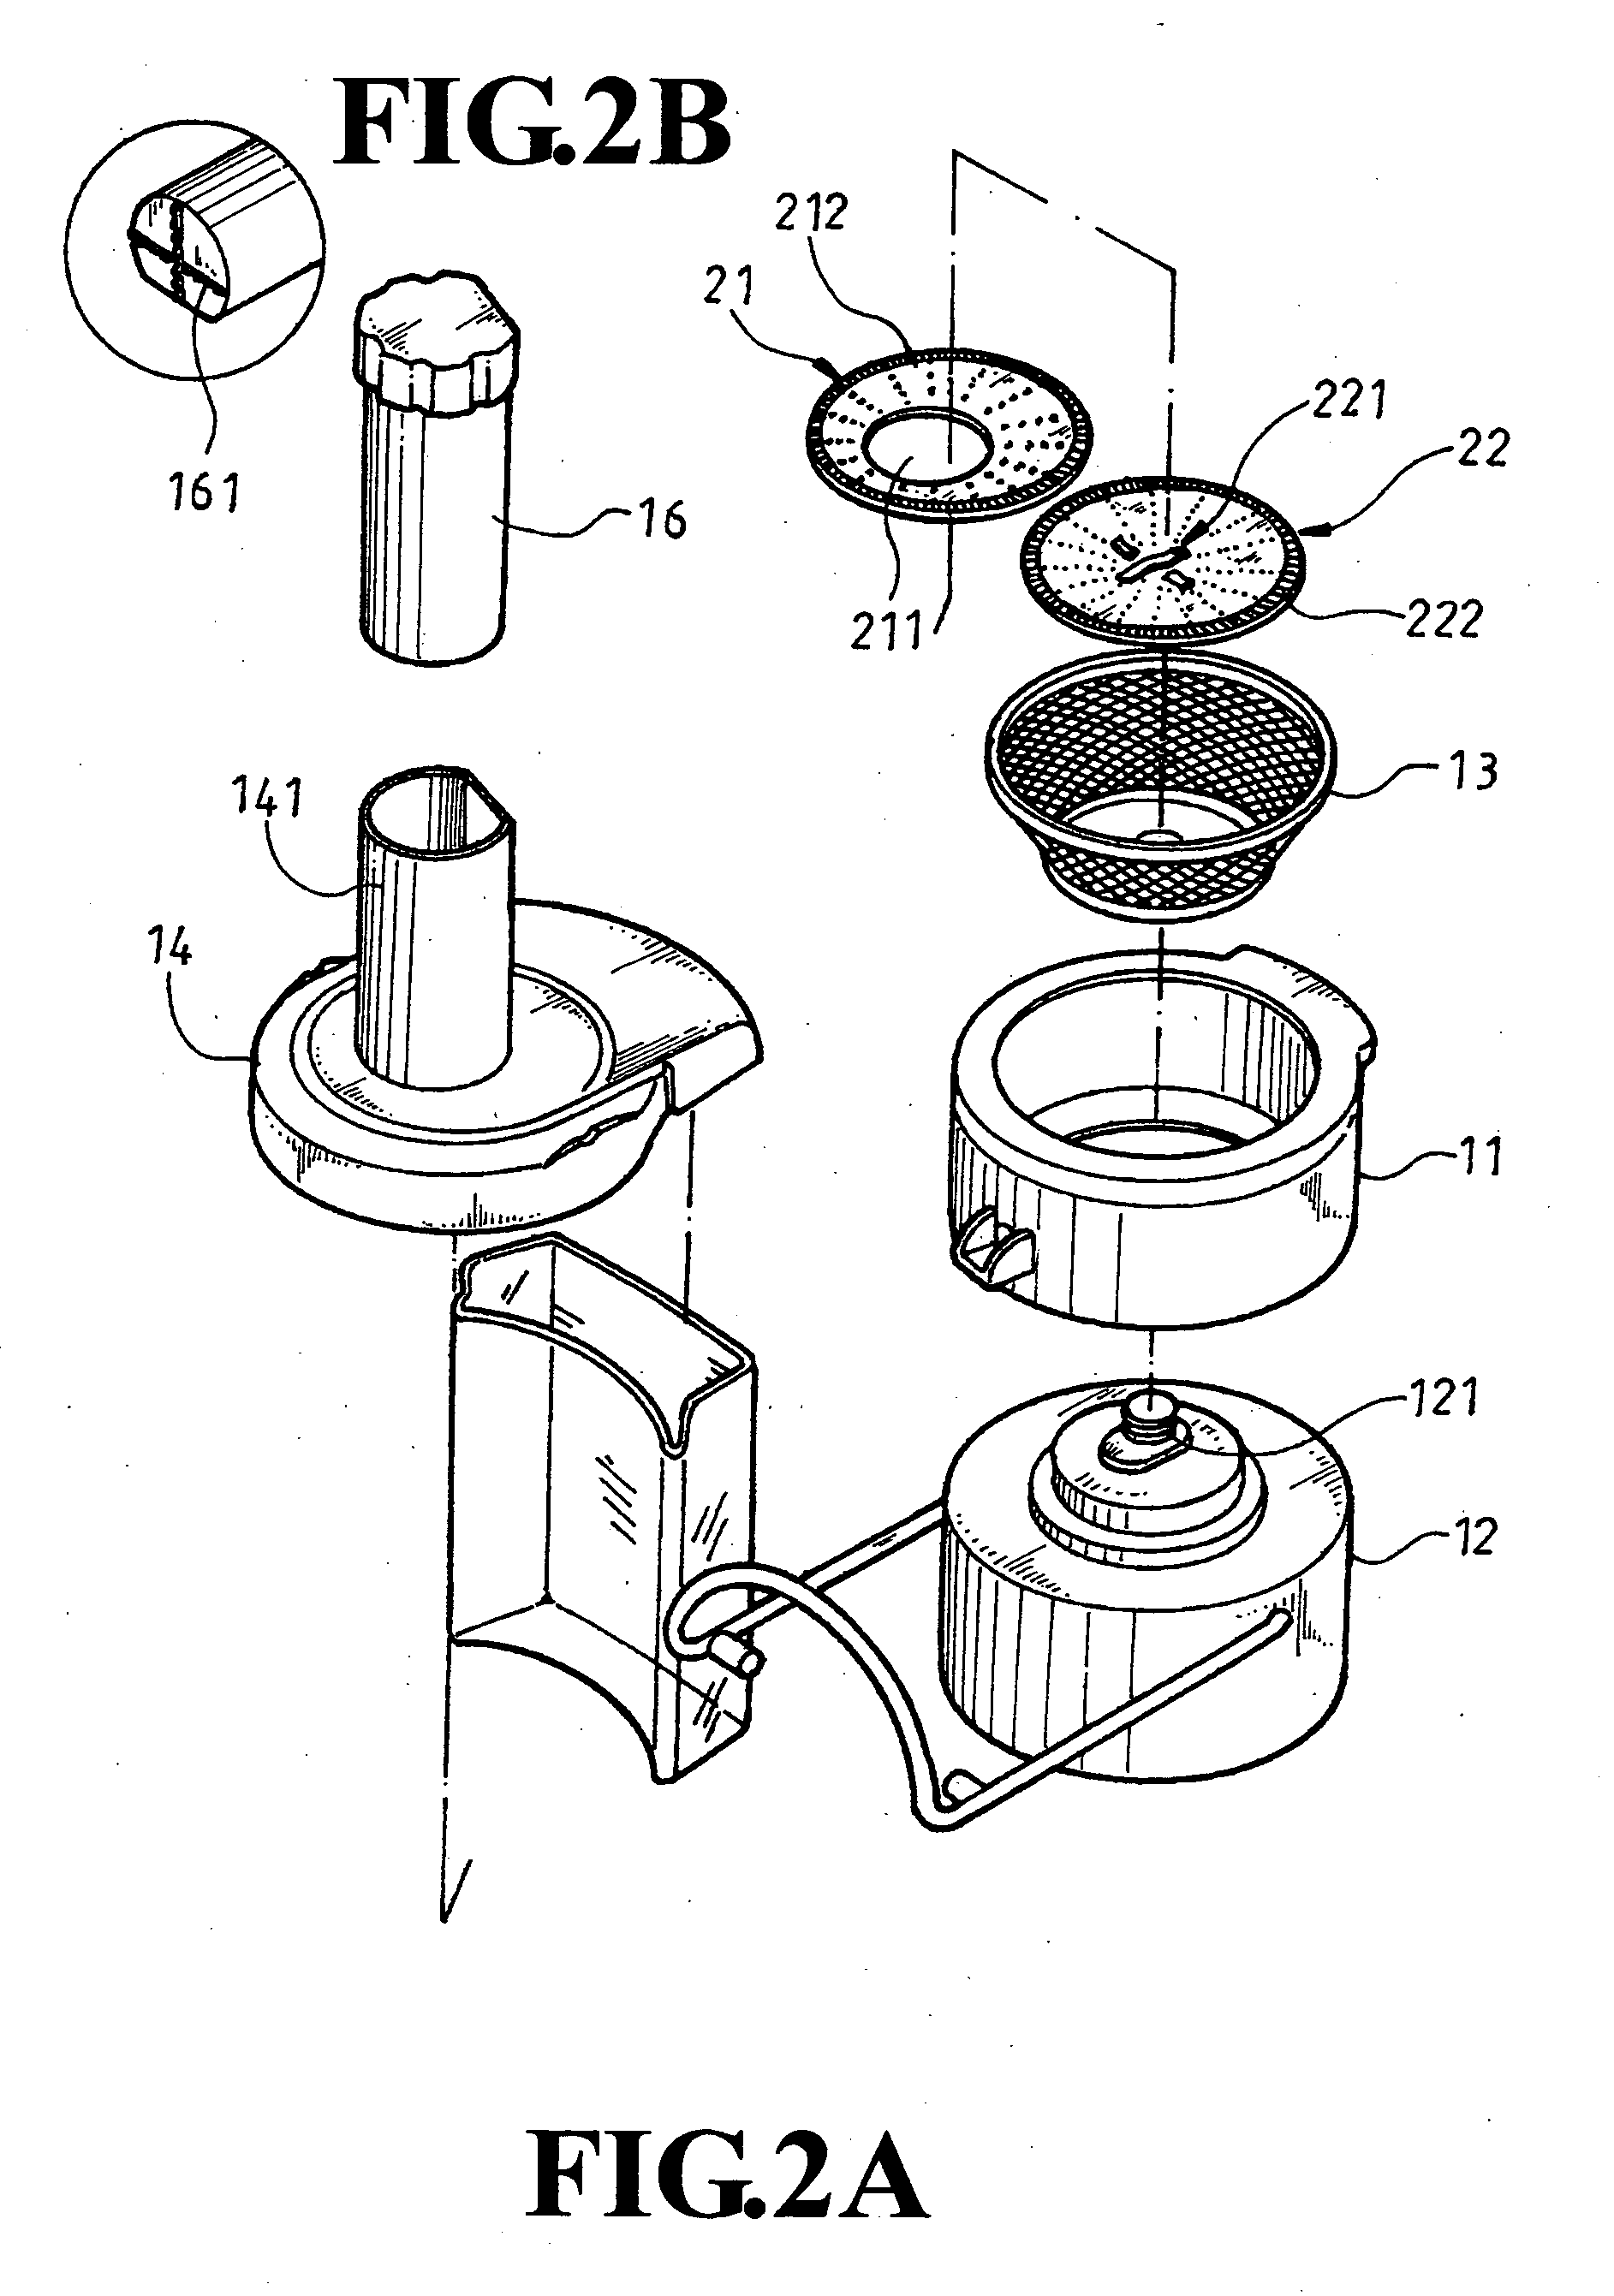 Food processor with combined grinding and juice extracting functions